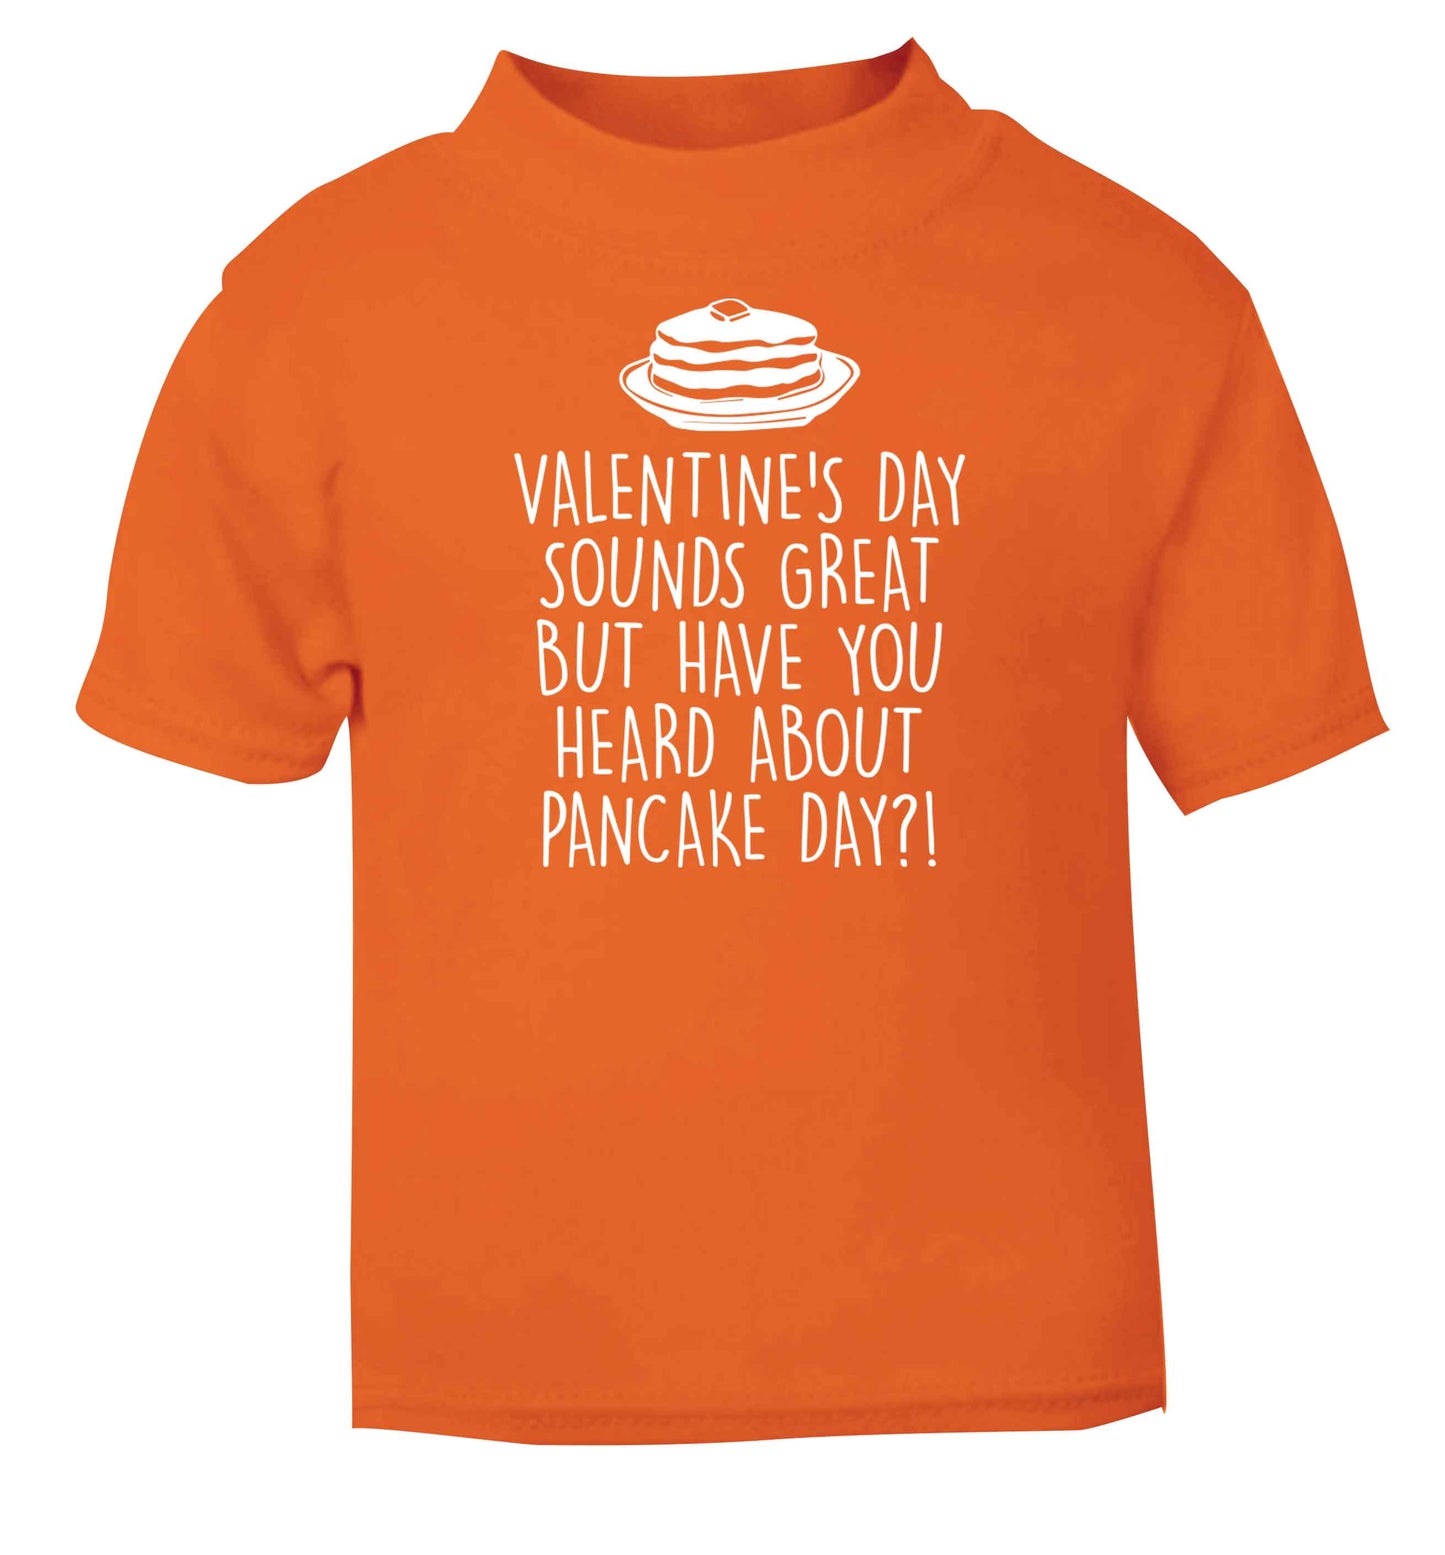 Valentine's day sounds great but have you heard about pancake day?! orange baby toddler Tshirt 2 Years